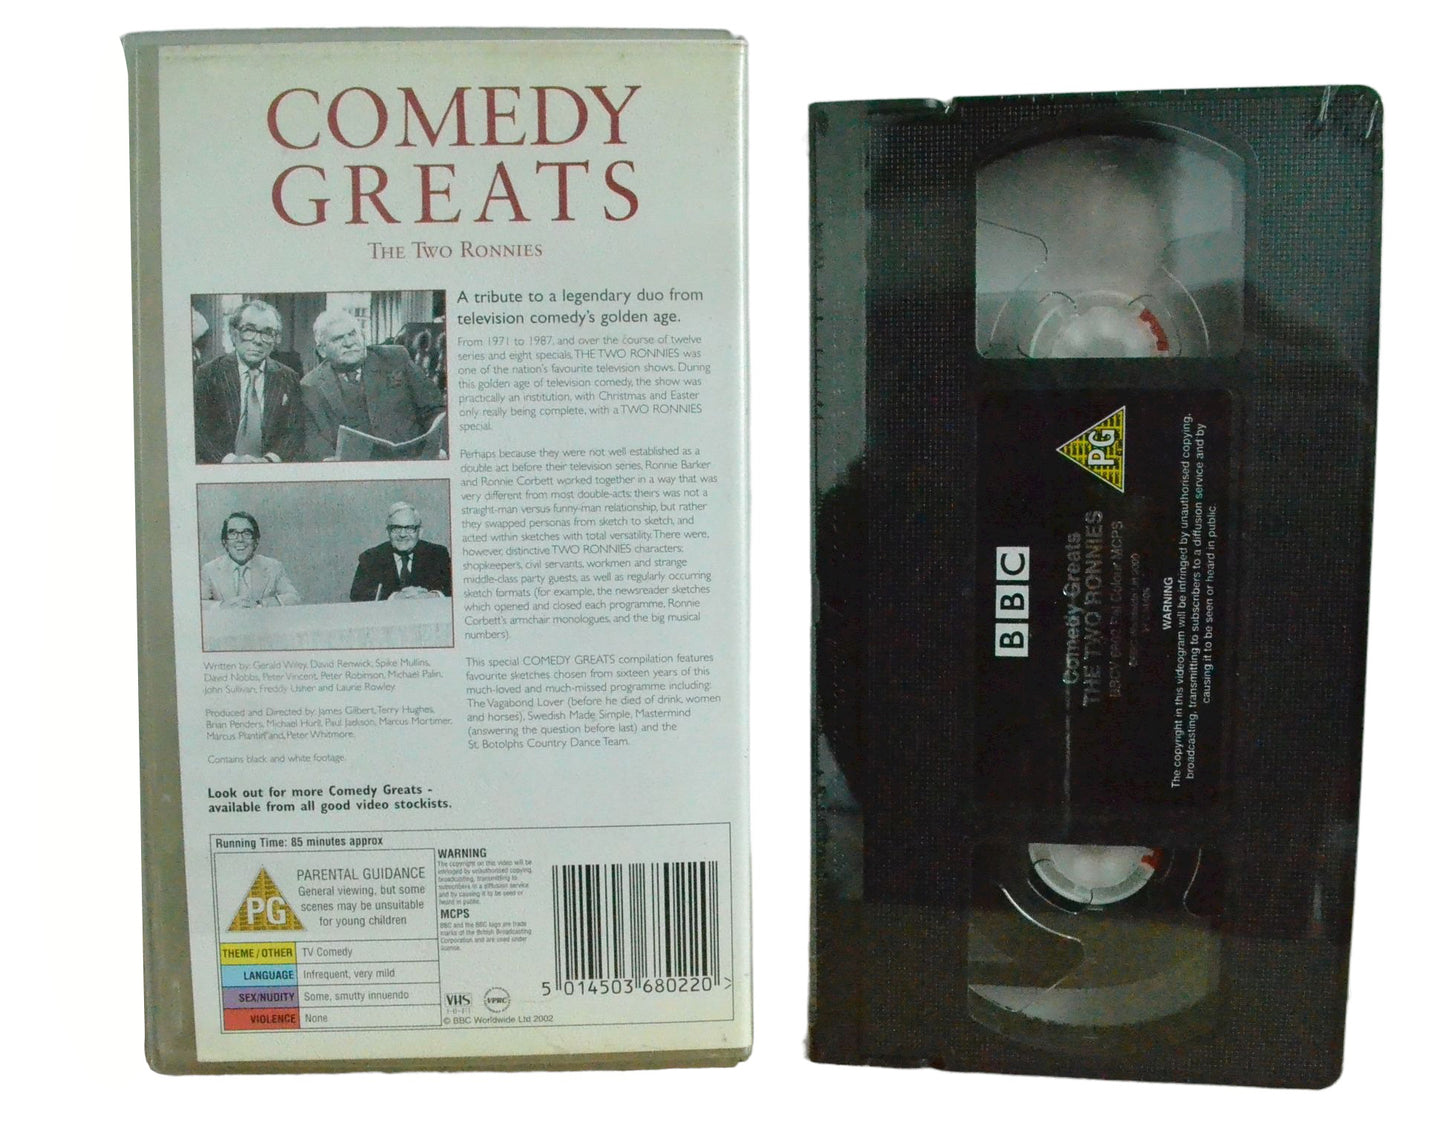 Comedy Greats - The Two Ronnies - Ronnie Barker - BBC Video - Brand New Sealed - Pal VHS-